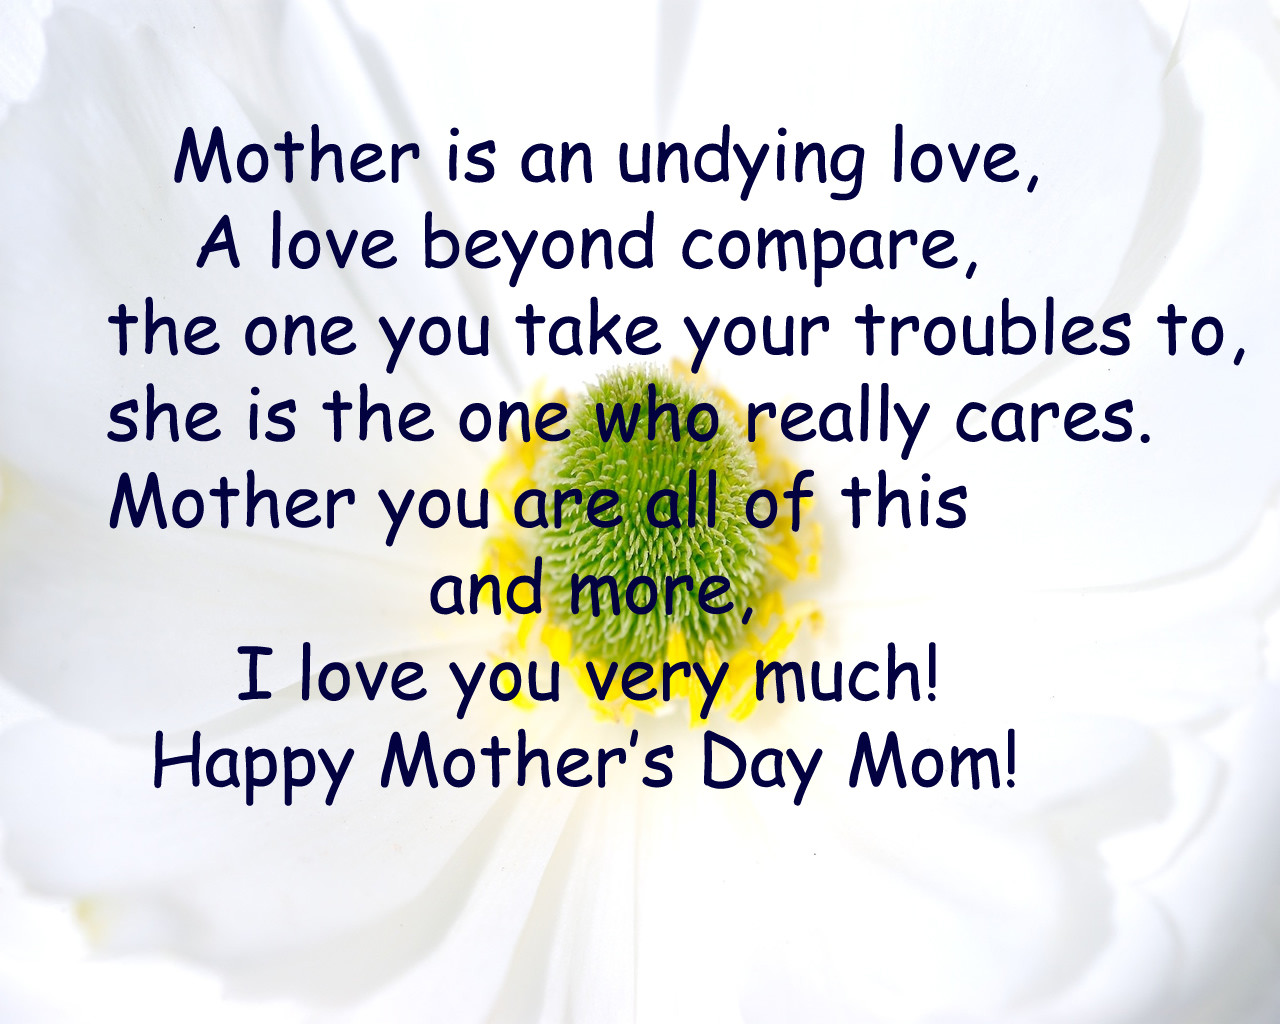 Best Mothers Day Quotes From Son
 Mothers Day Quotes From Son QuotesGram